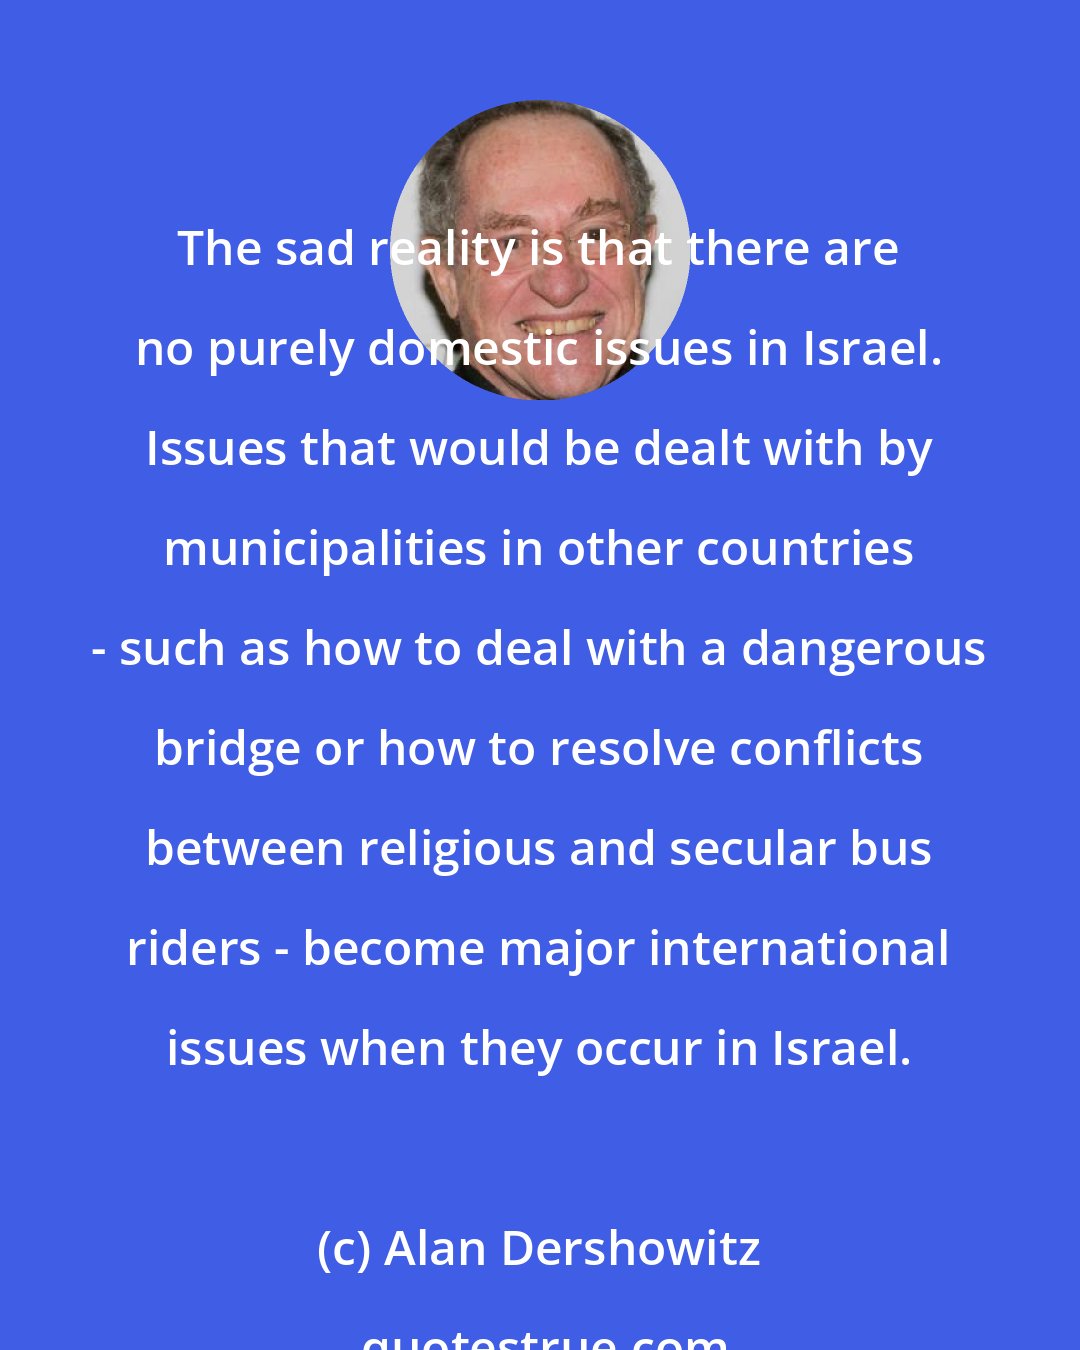 Alan Dershowitz: The sad reality is that there are no purely domestic issues in Israel. Issues that would be dealt with by municipalities in other countries - such as how to deal with a dangerous bridge or how to resolve conflicts between religious and secular bus riders - become major international issues when they occur in Israel.